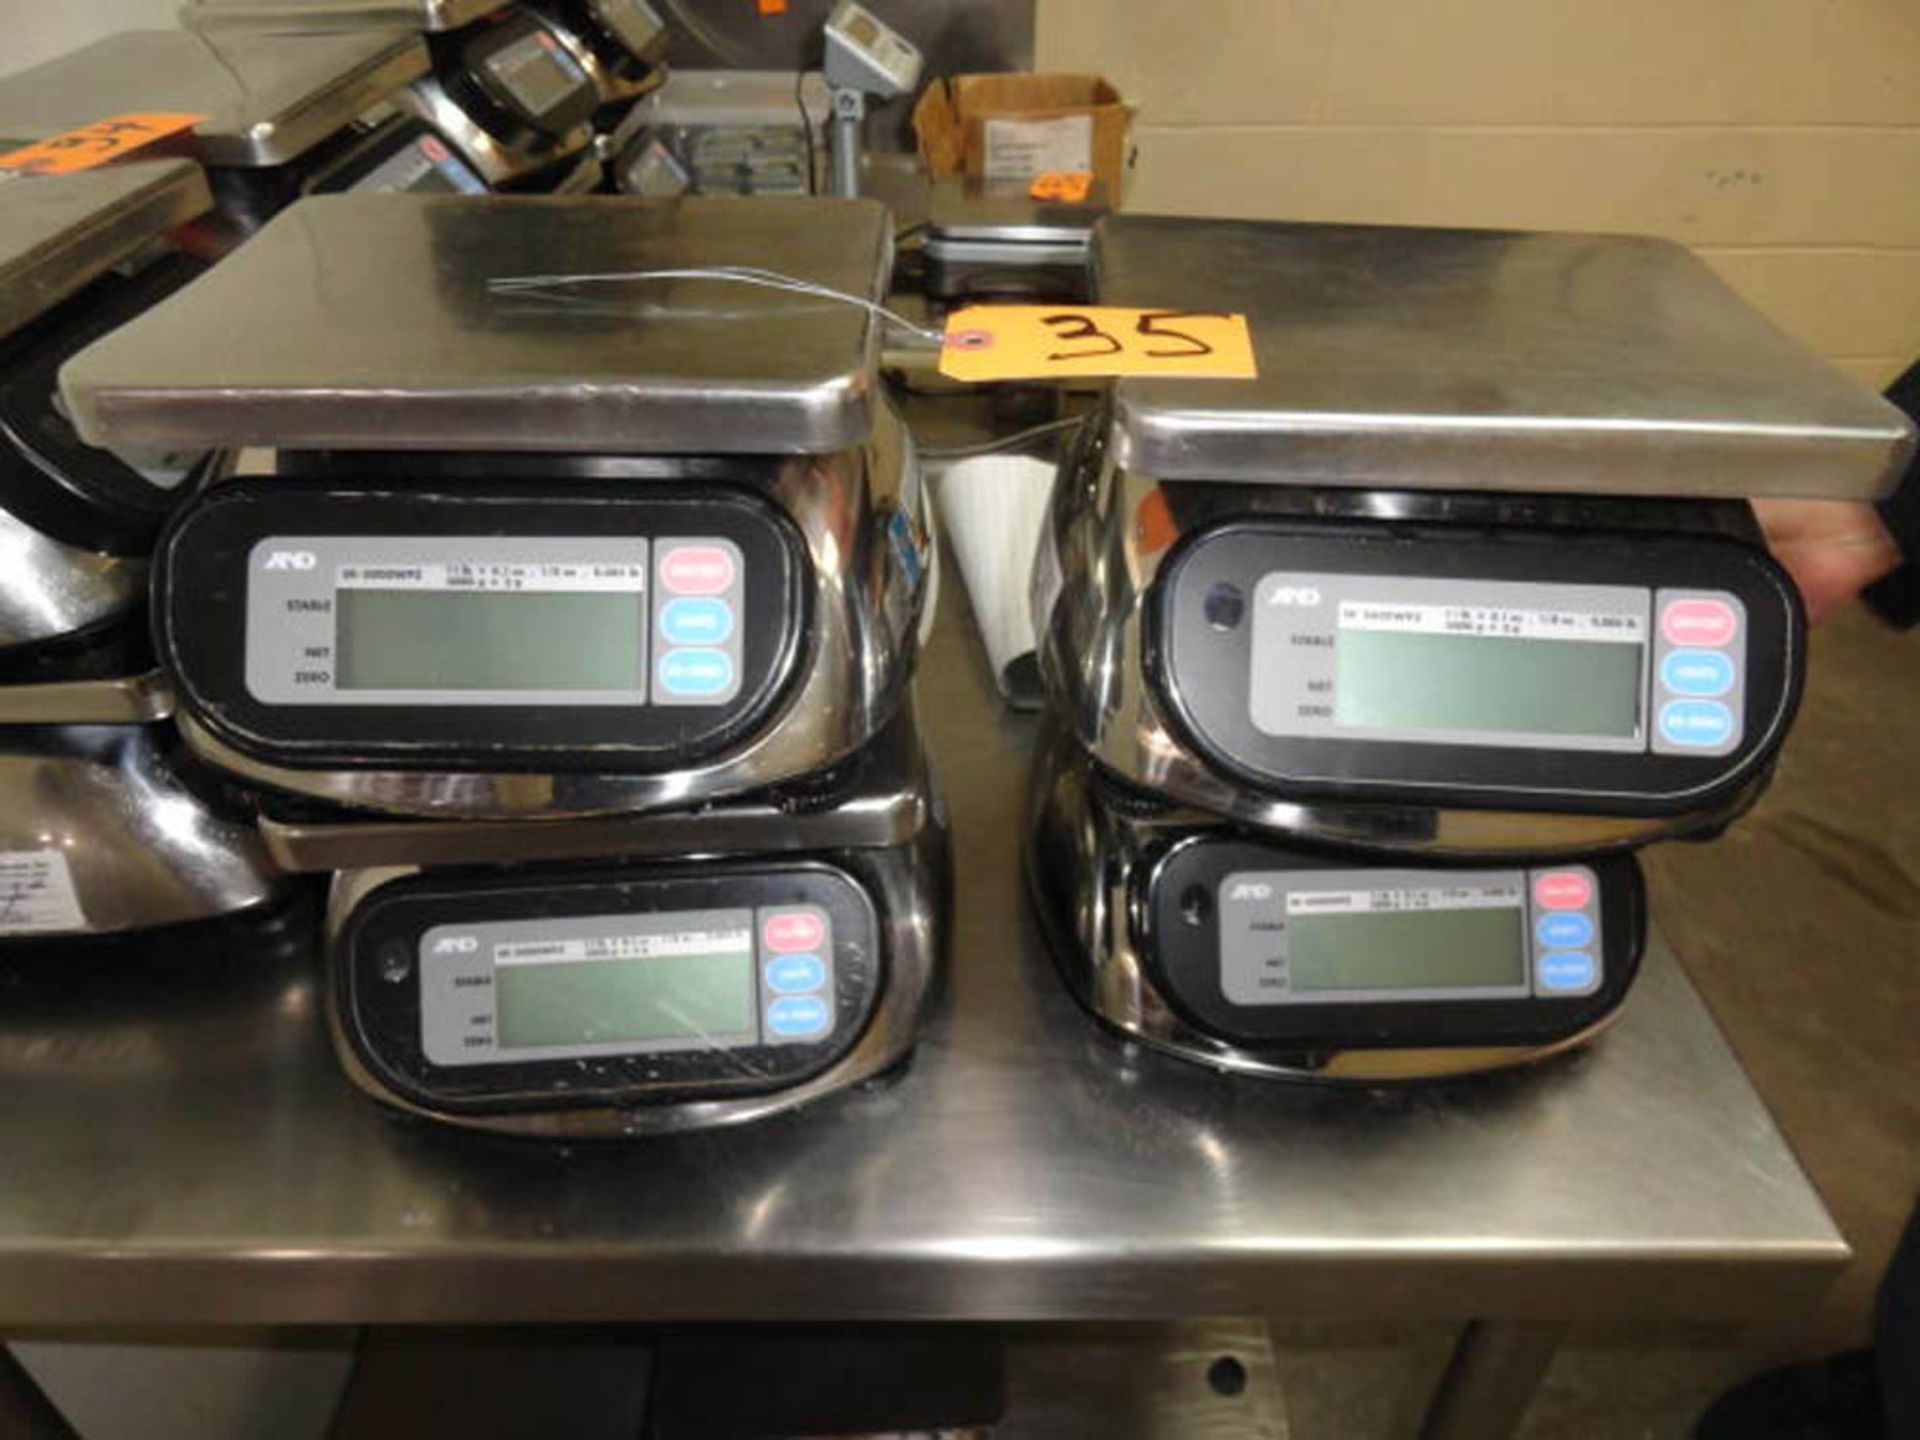 (4) AND DIGITAL SCALE, BATTERY OPERATED, 11# X 0.1, 5000 GRAM